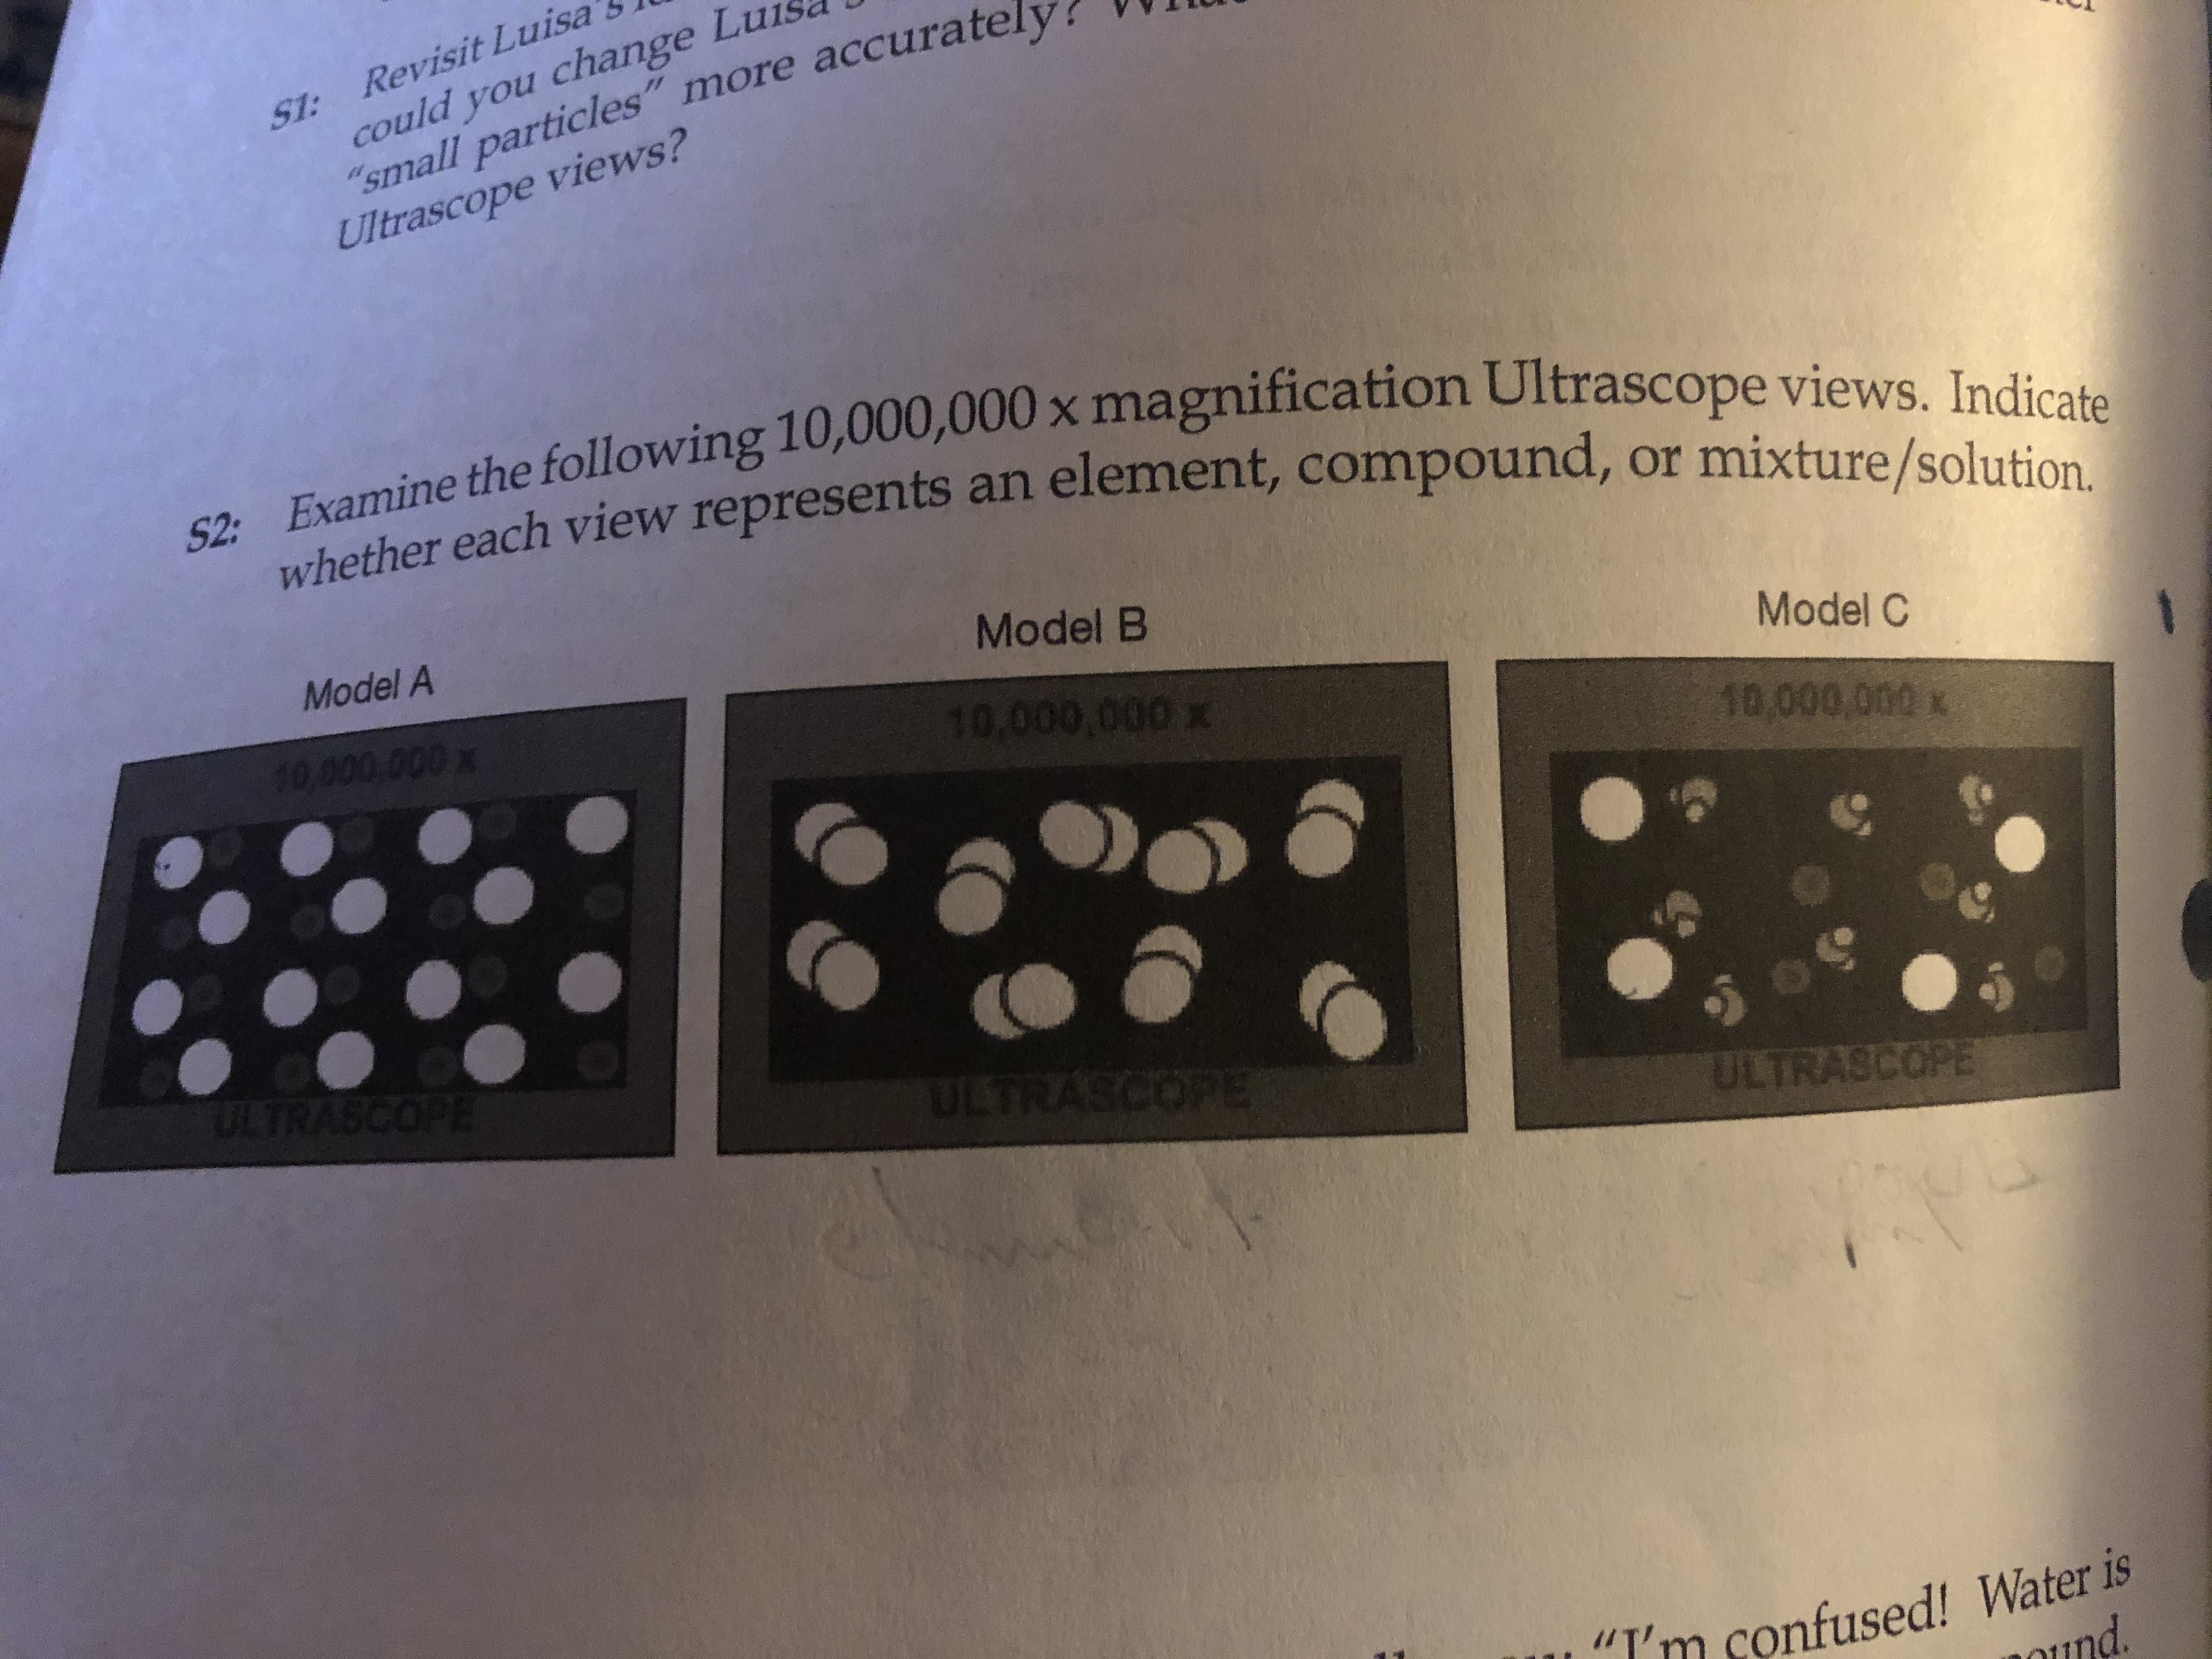 S1: Revisit Luisa
could you change L
"small particles" more accurate
Ultrascope views?
52: Examine the following 10,000,000 x magnification Ultrascope views. Indicate
whether each view represents an element, compound, or mixture/solution.
Model A
Model B
10.000 000 x
Model C
10.000.000
10,000,000 x
TRASCOPE
ULTRASCOPE
ULTRASCOPE
"I'm confused! Water is
nd
